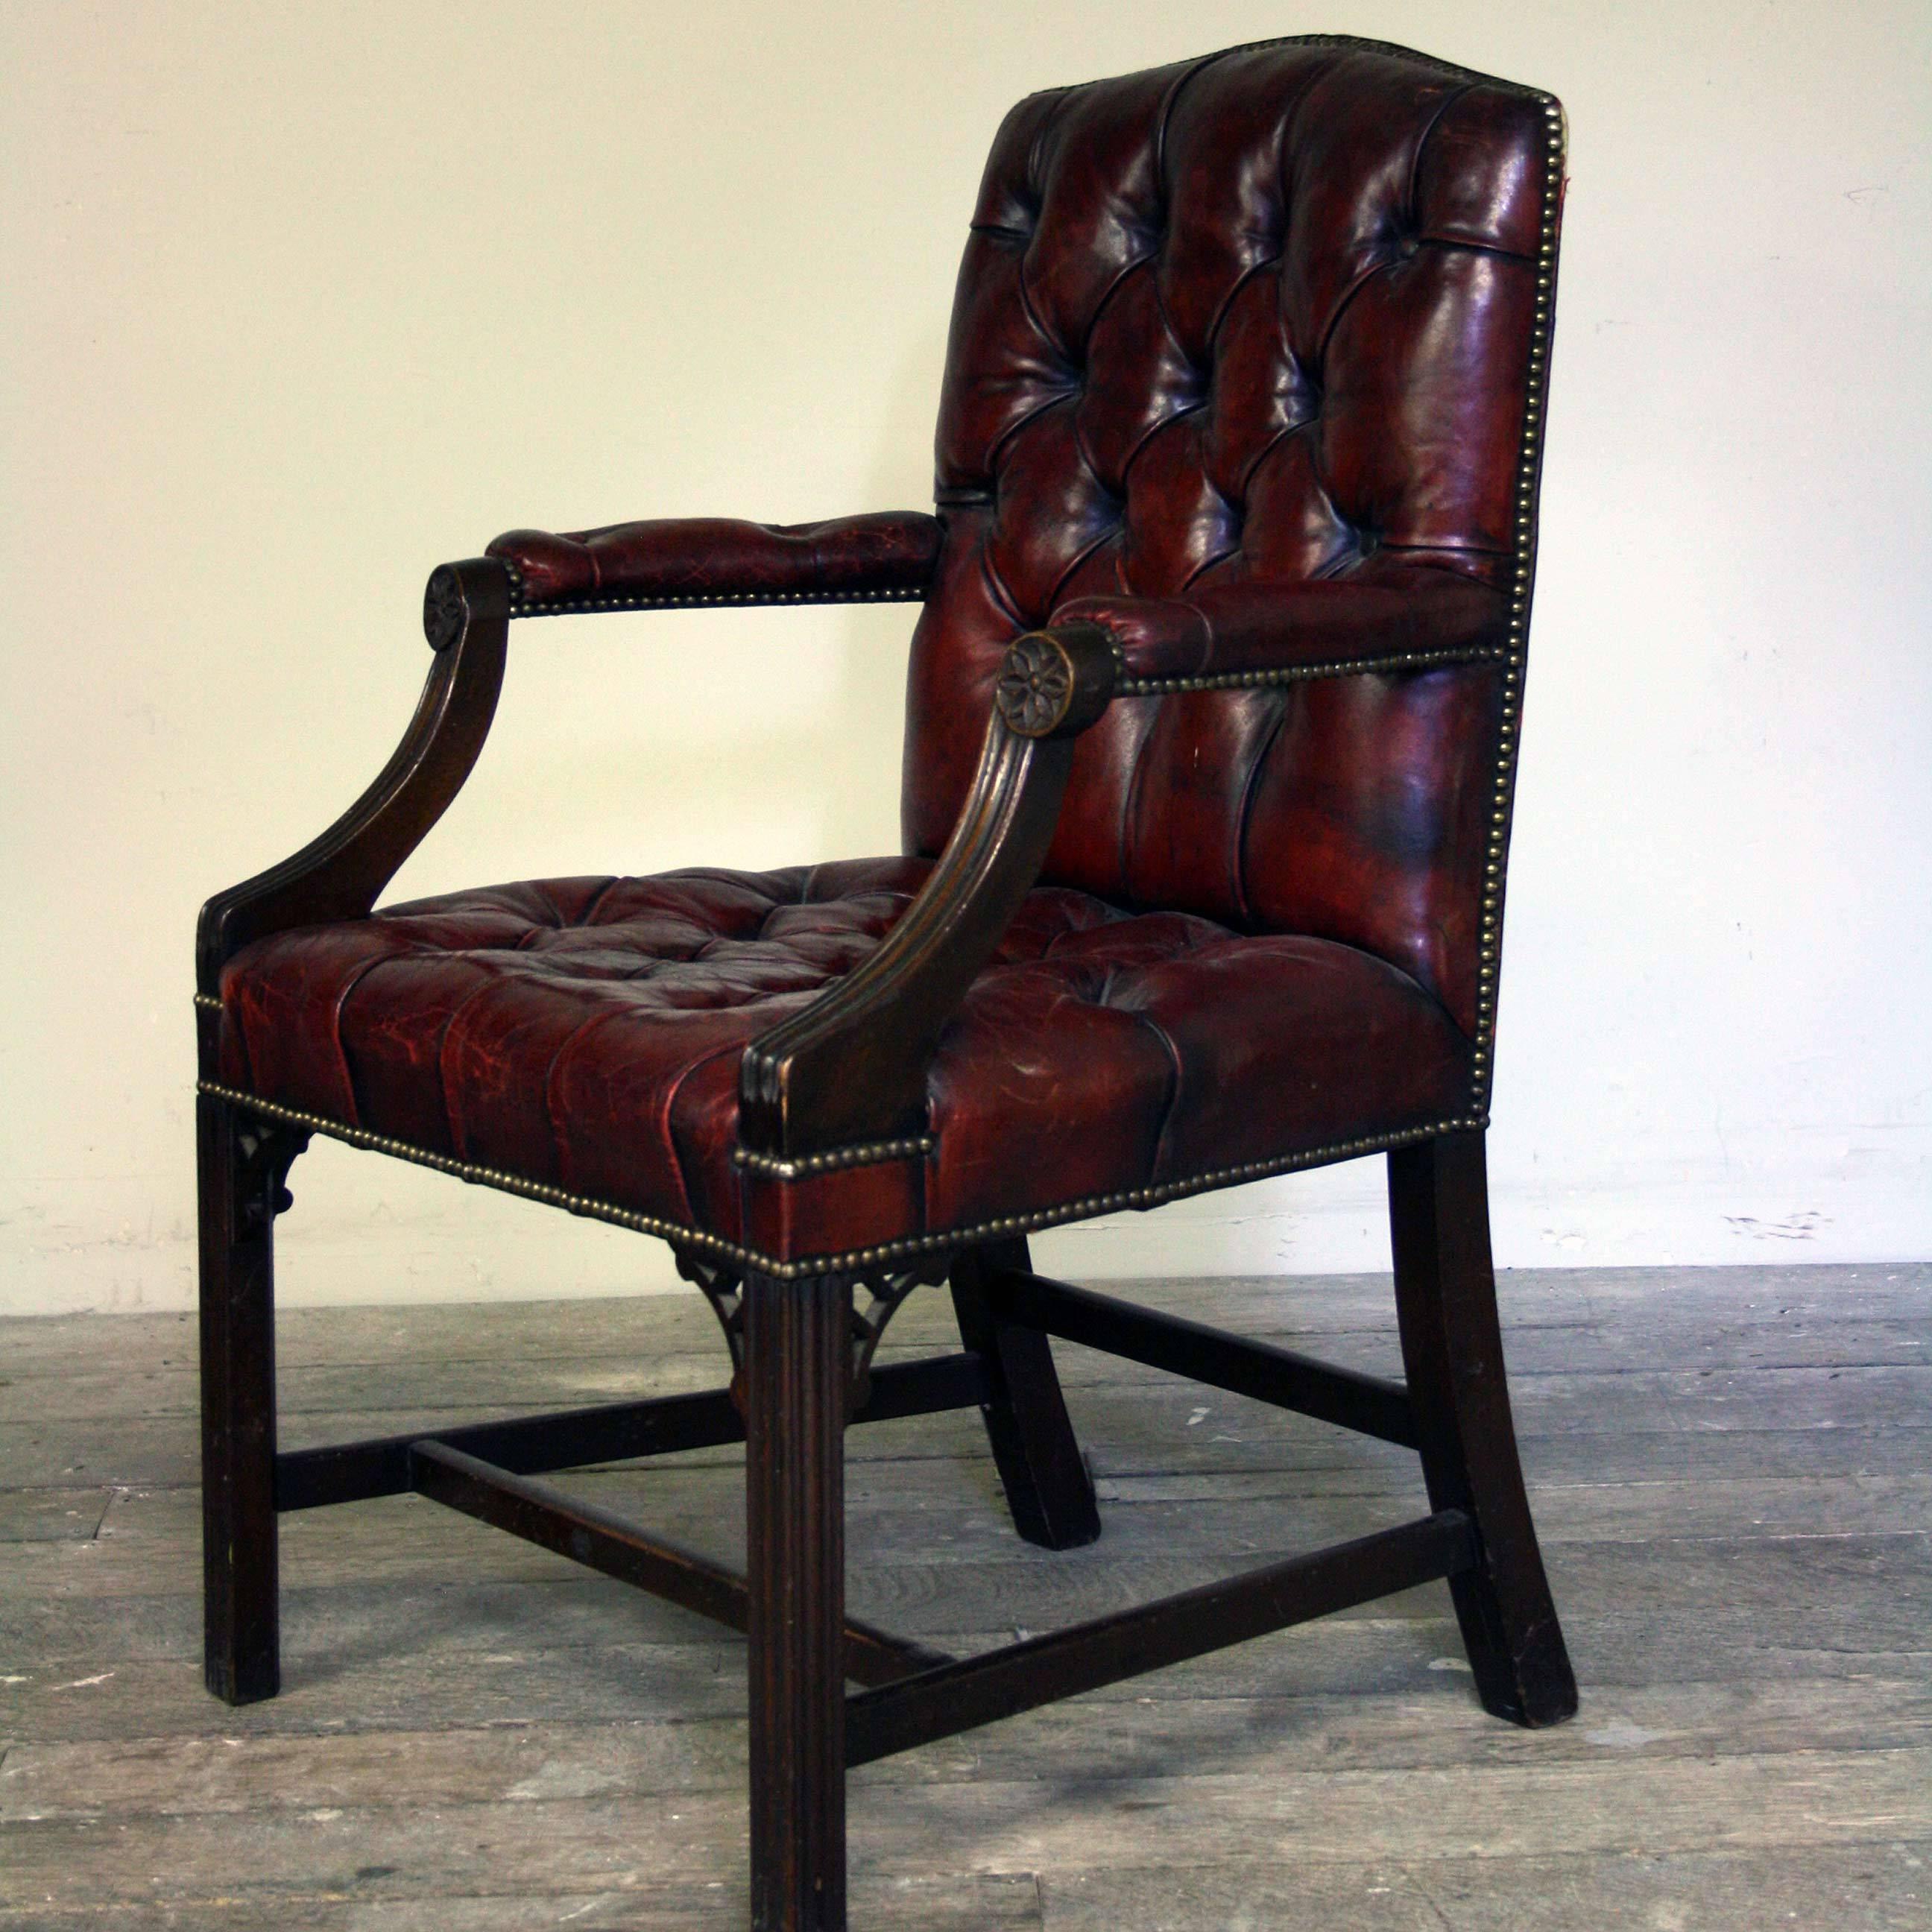 A lovely Gainsborough leather chair in original red leather, circa 1900-1910, in fantastic condition.